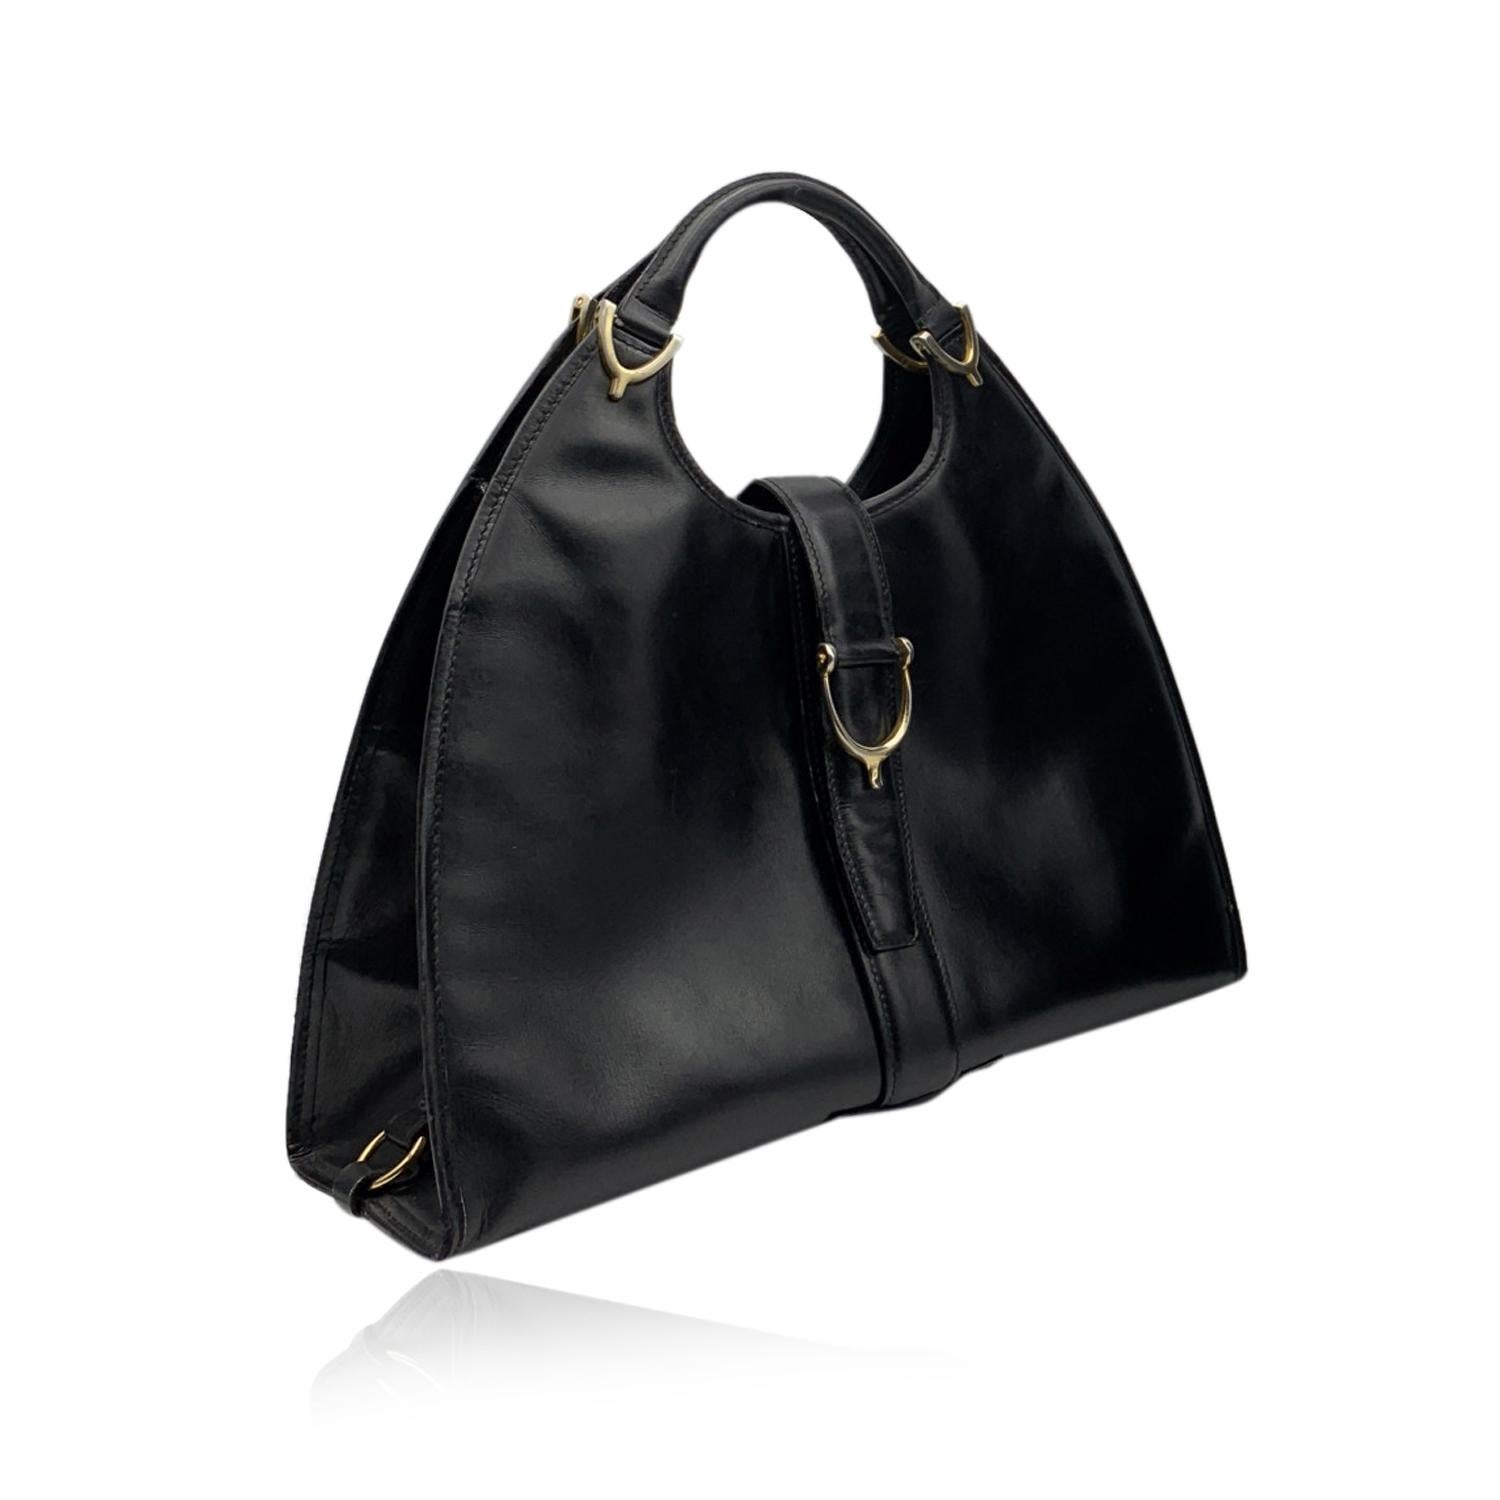 Gucci Vintage Black Leather Stirrup Hobo Bag Handbag In Good Condition For Sale In Rome, Rome